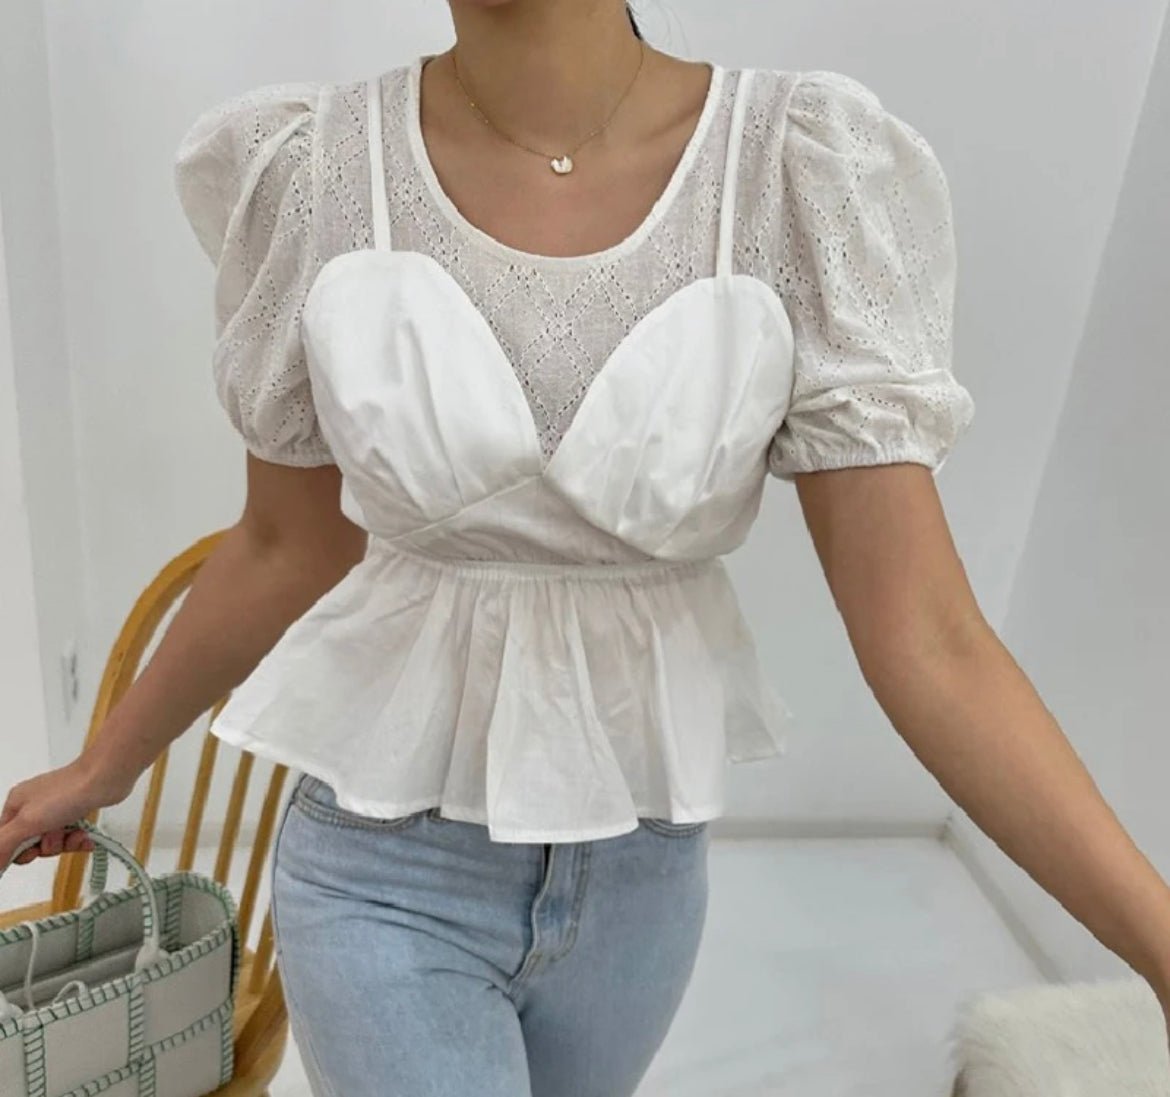 Eyelet lace blouse with tank overlay - Oliver Barret